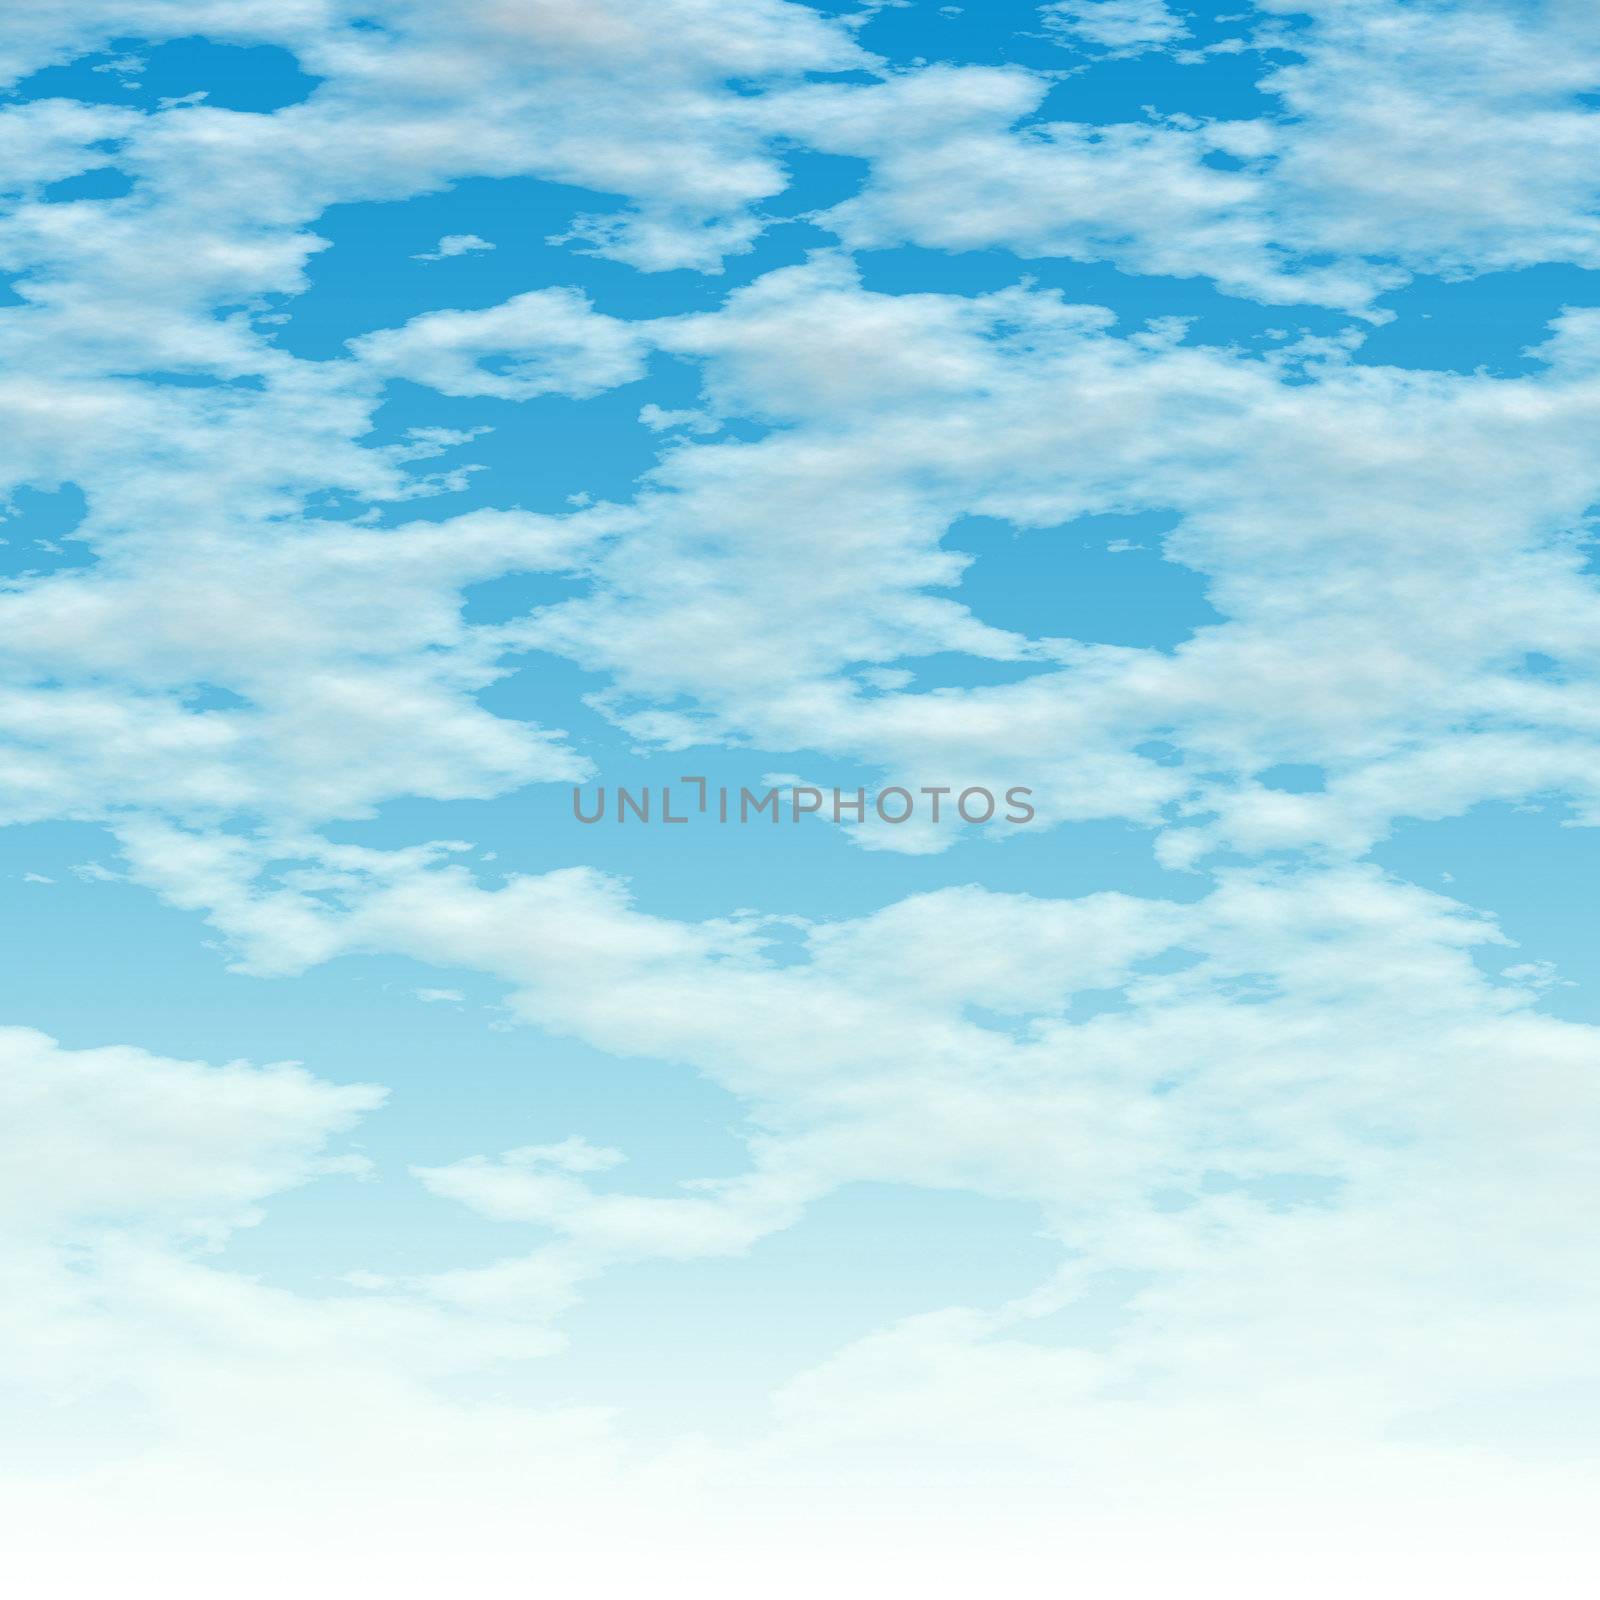 Here is a simple clouds background - it fades to white at the bottom.  This tiles seamlessly from side to side.